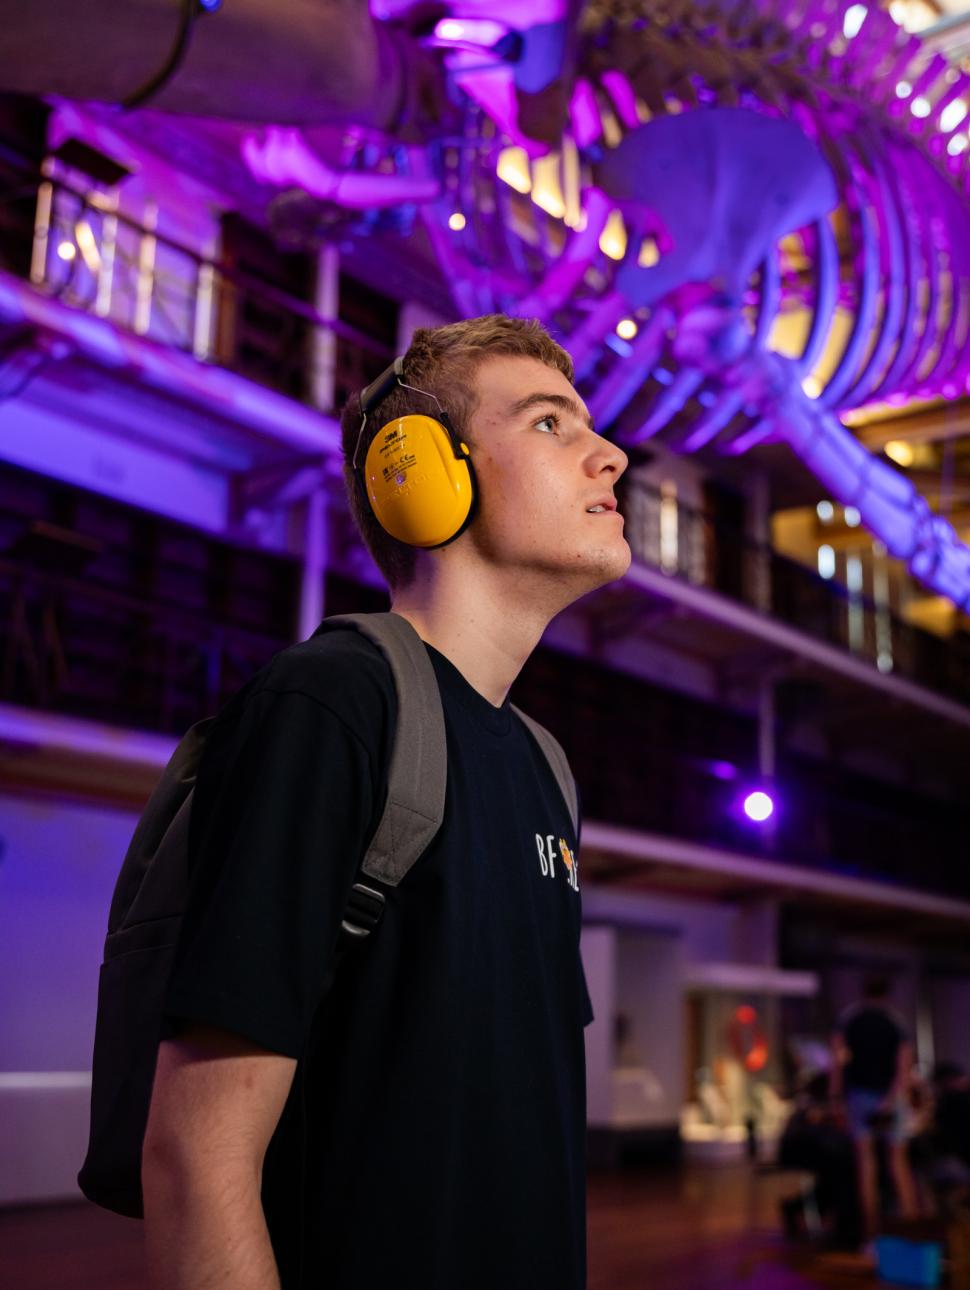 A young man wearing headphones stands in front of a whale skeleton, captivated by the majestic remains.